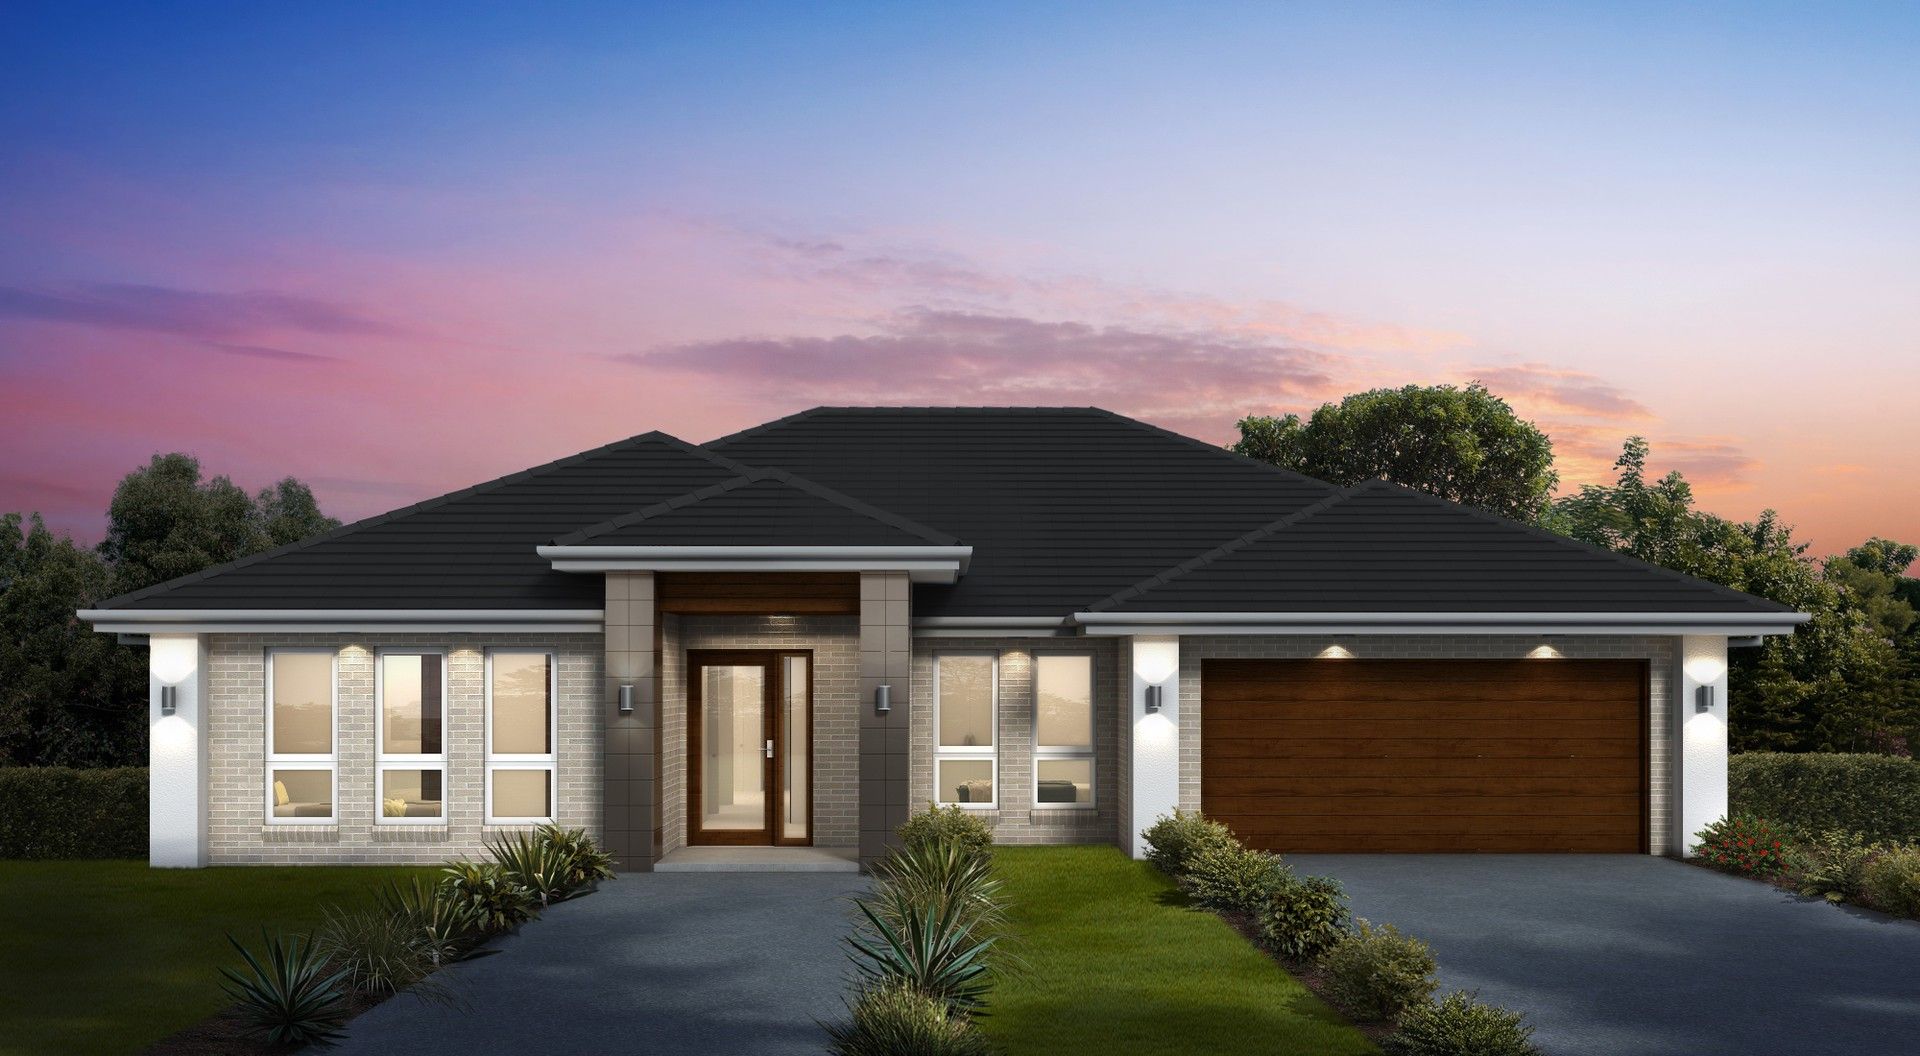 4 bedrooms New House & Land in Lot 82 Acacia Crt PARKES NSW, 2870